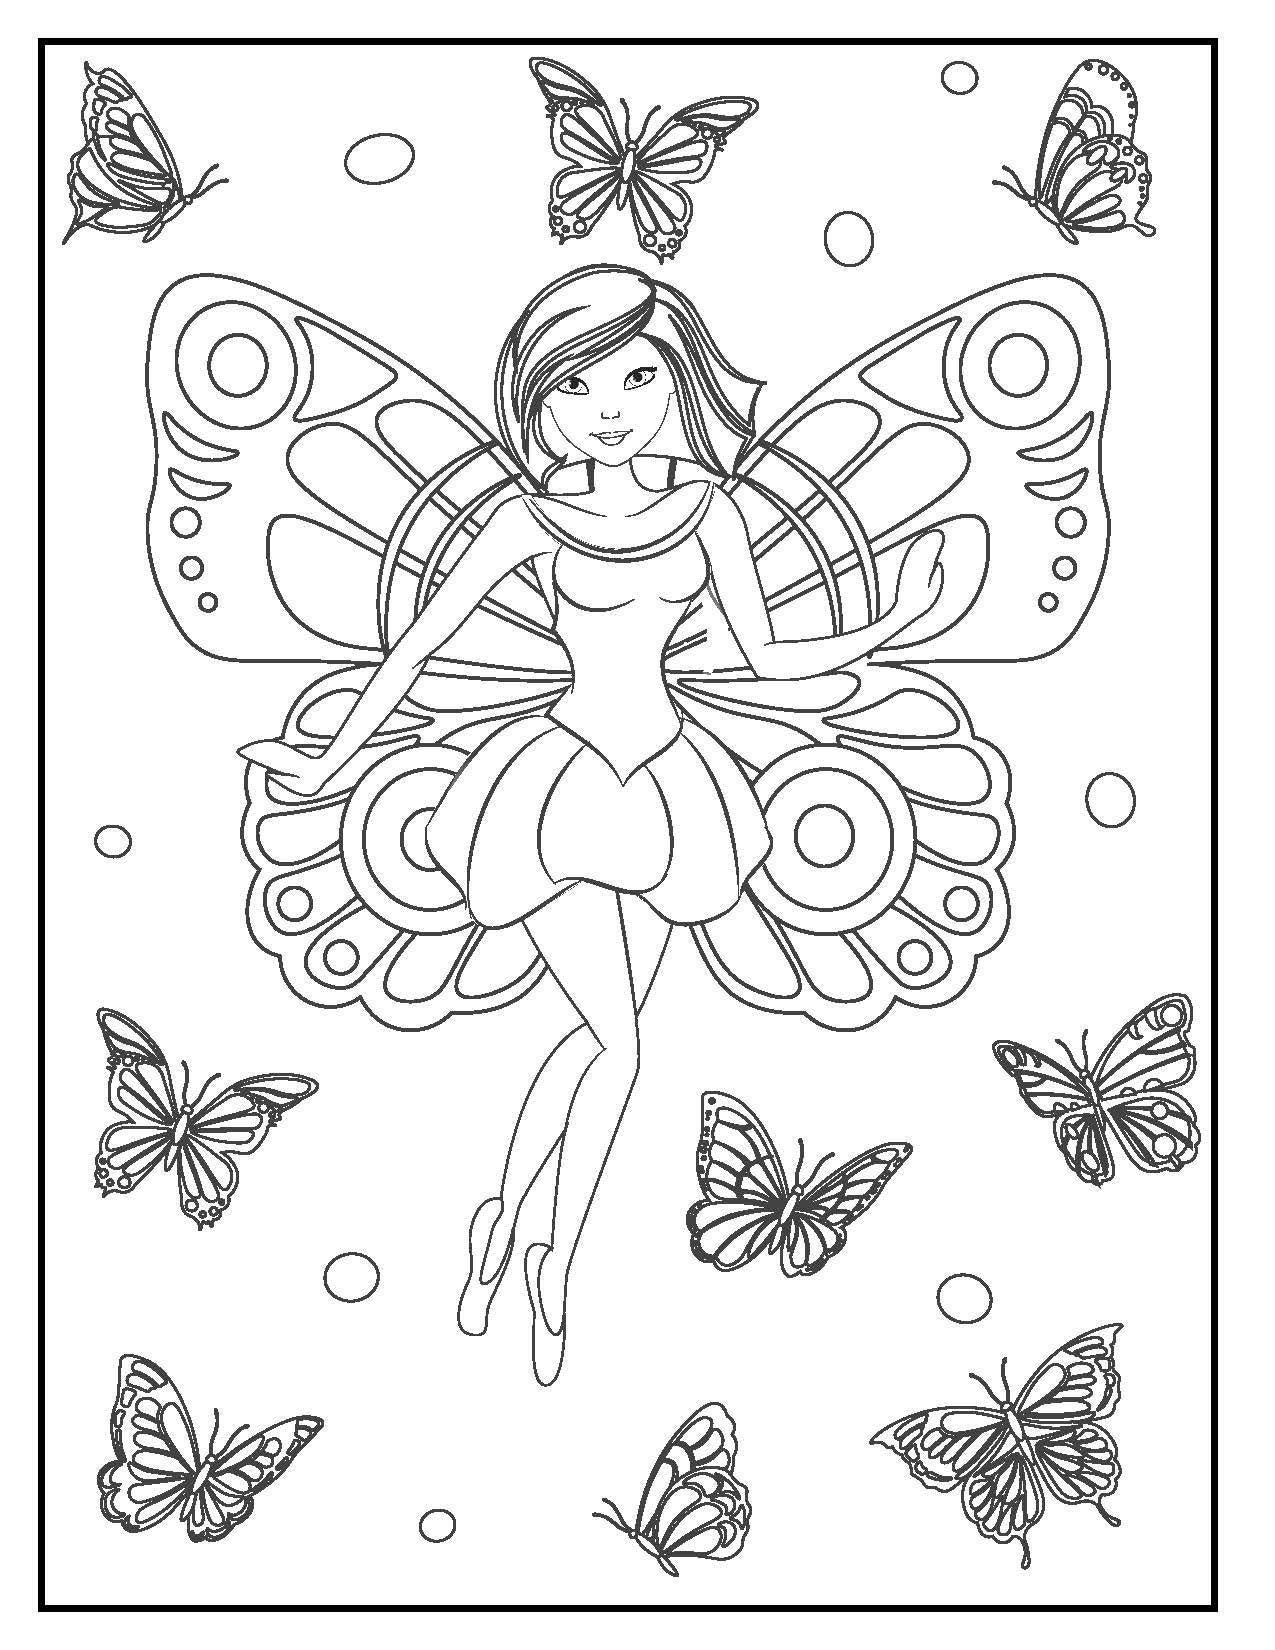 Printable fairy coloring book pages